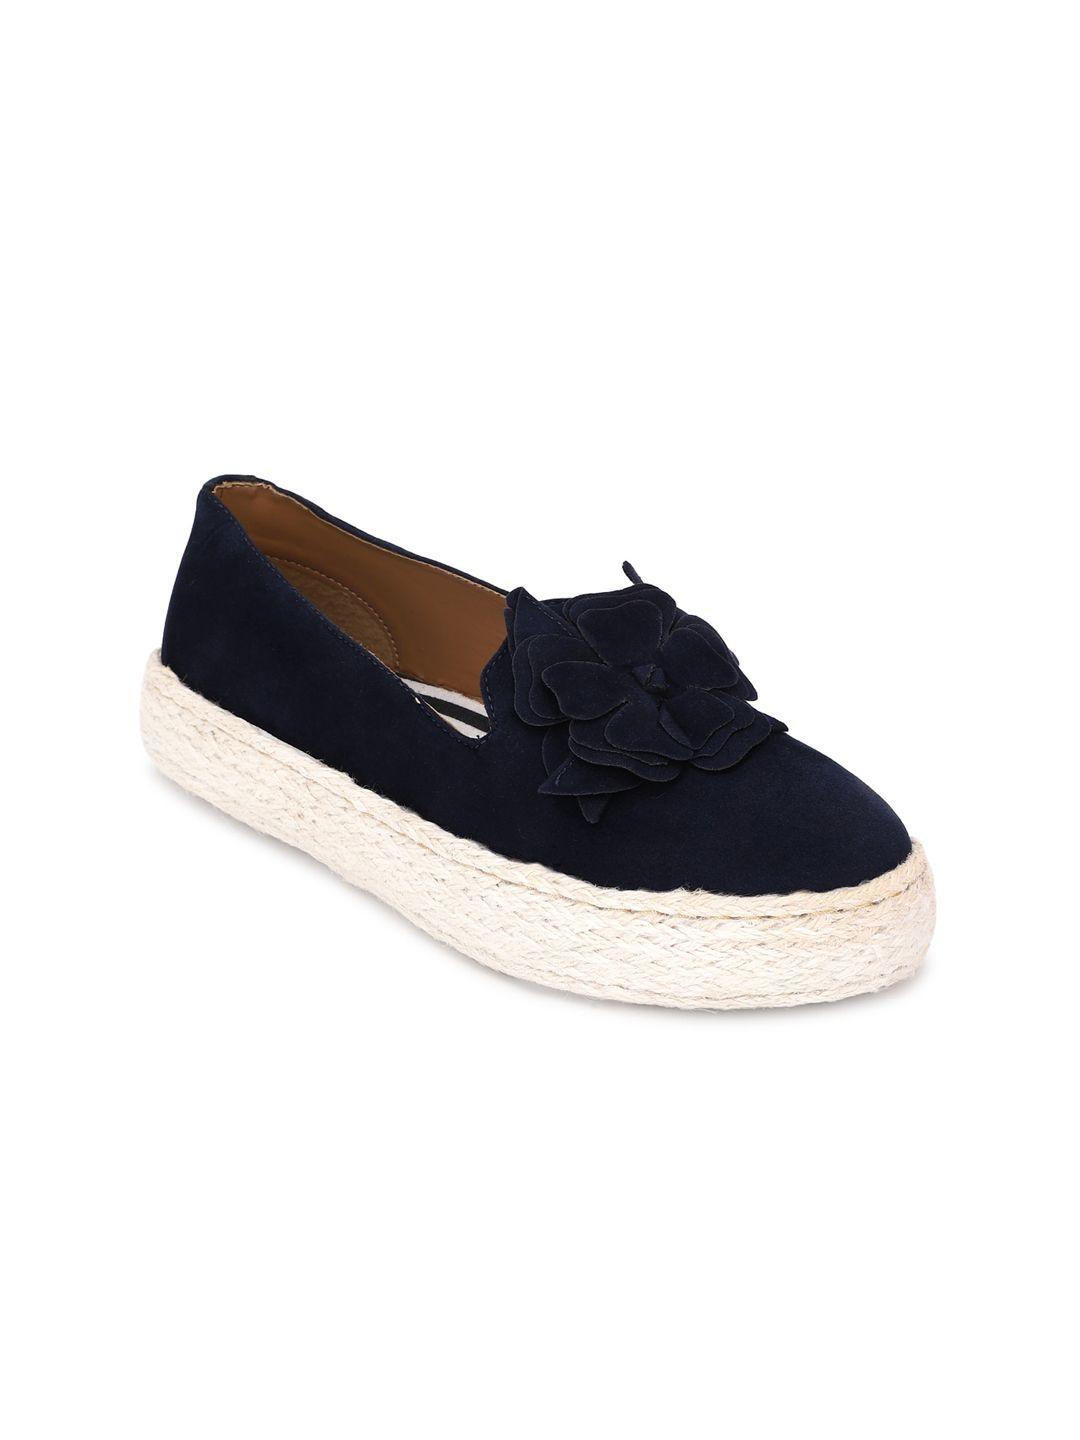 forever 21 women navy blue suede loafers